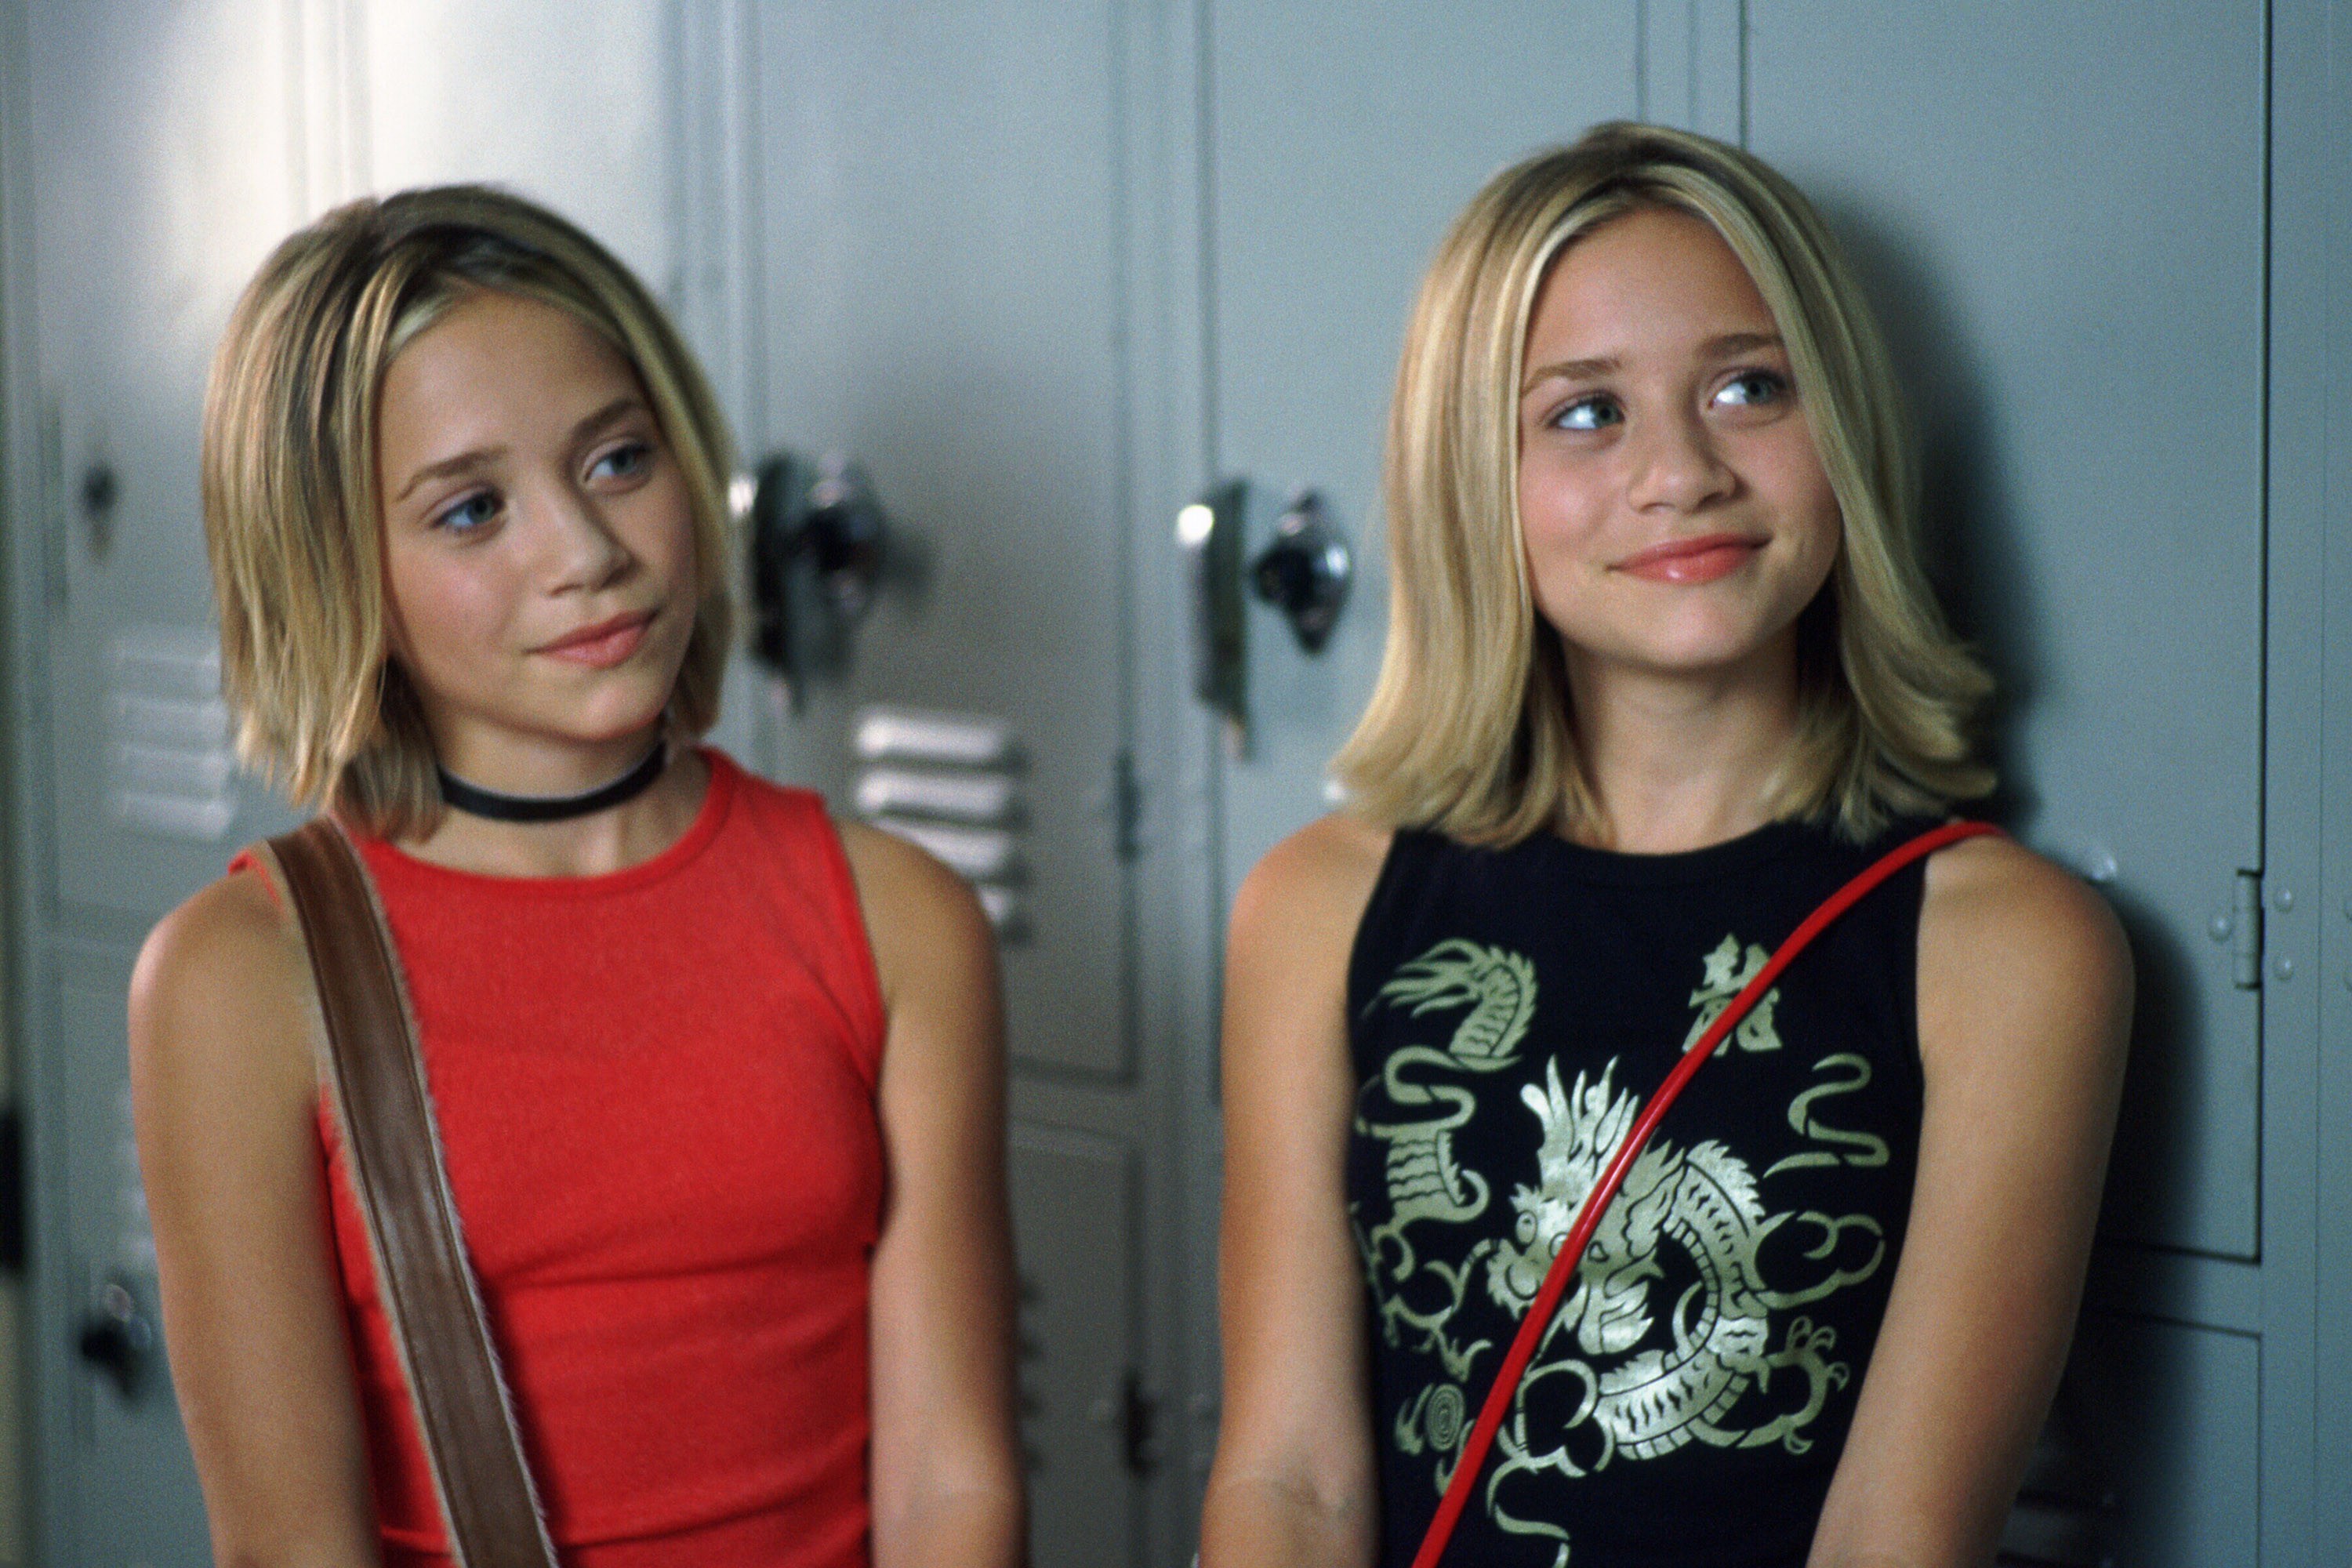 10 Hairstyles From The 00s That Should Probably Stay There